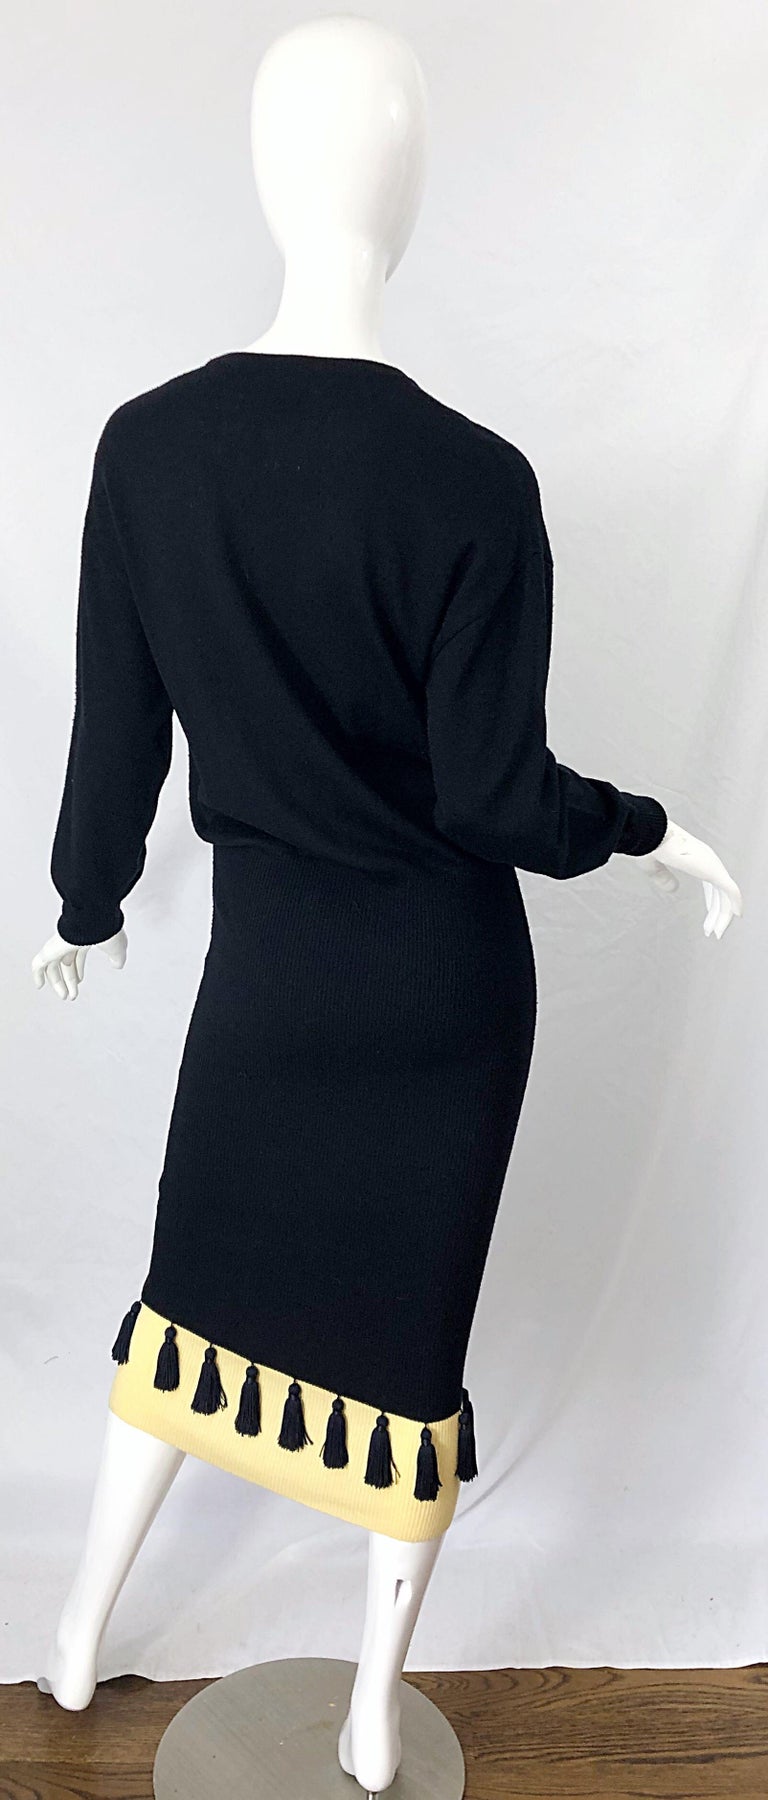 1980s Angelo Tarlazzi Black and Ivory Wool Dolman Sleeve 80s Sweater Dress For Sale 9